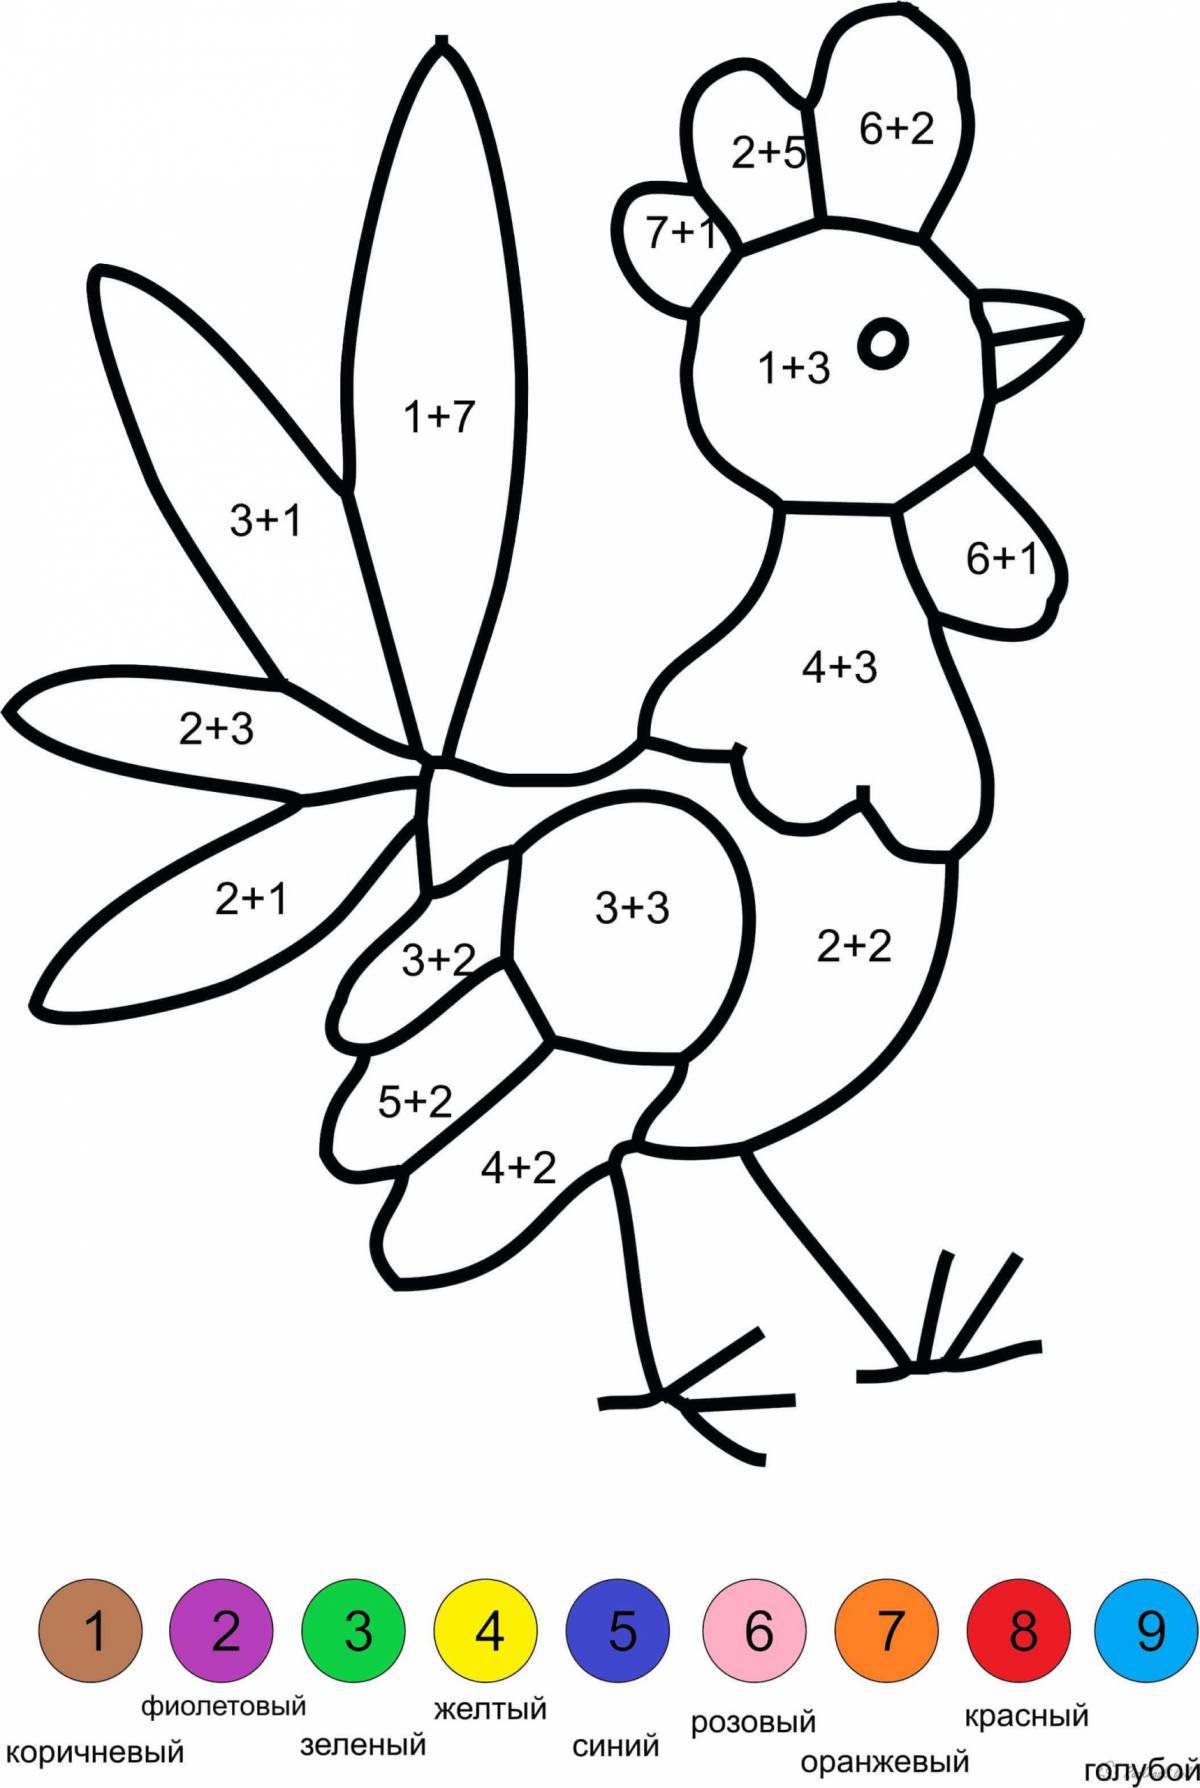 Entertaining coloring up to 10 for 1st grade